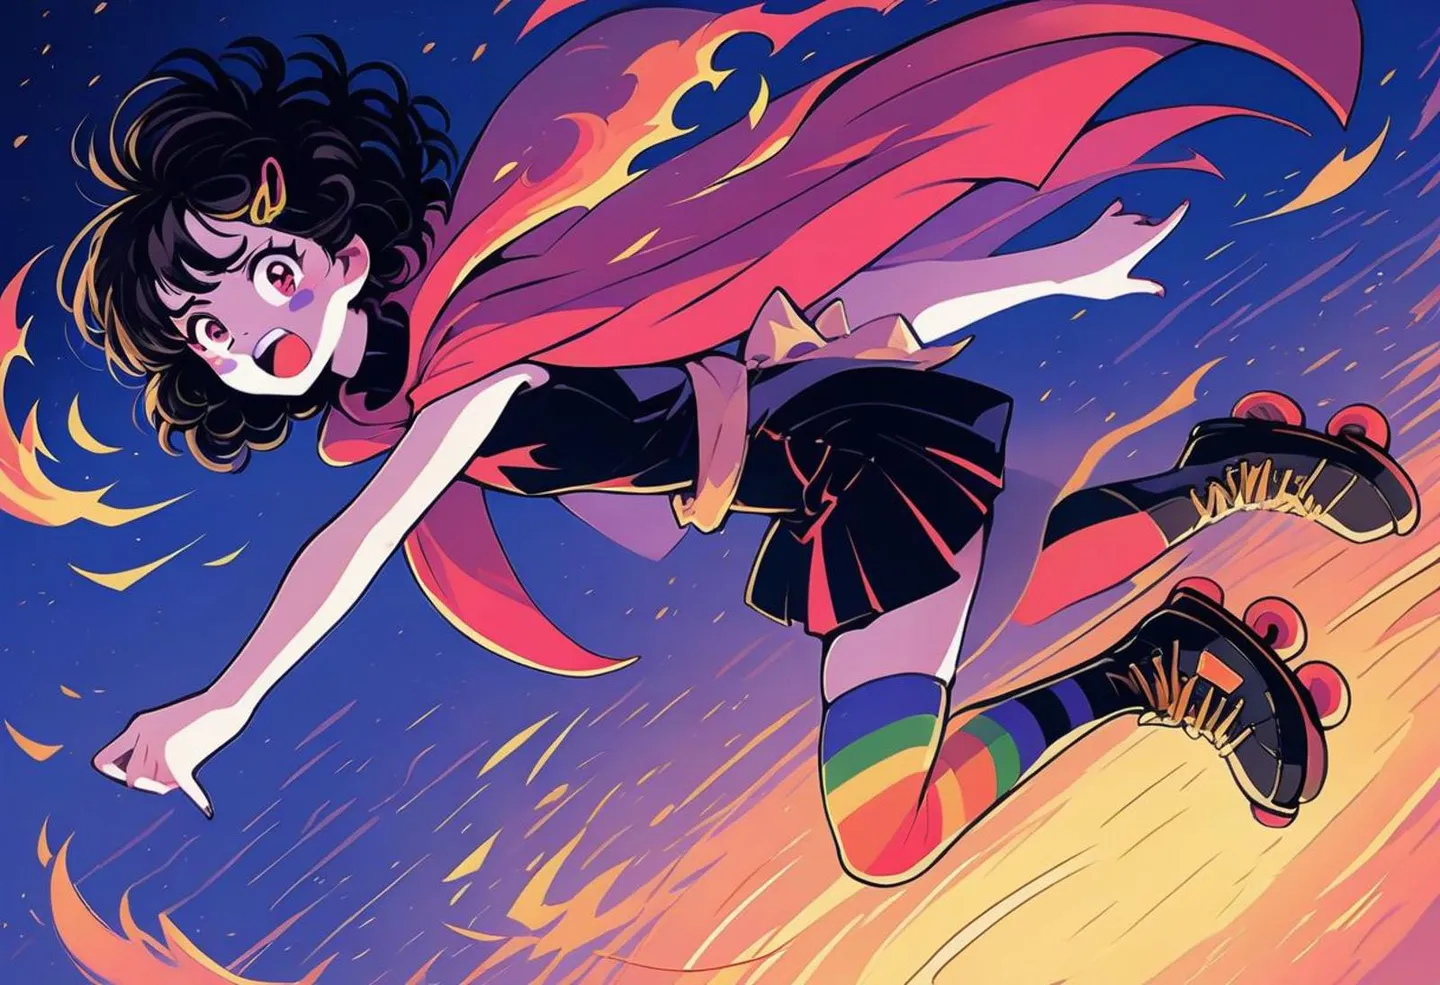 Anime girl with curly hair roller skating, wearing a fiery cape, rainbow stockings, and black boots. AI generated image using Stable Diffusion.